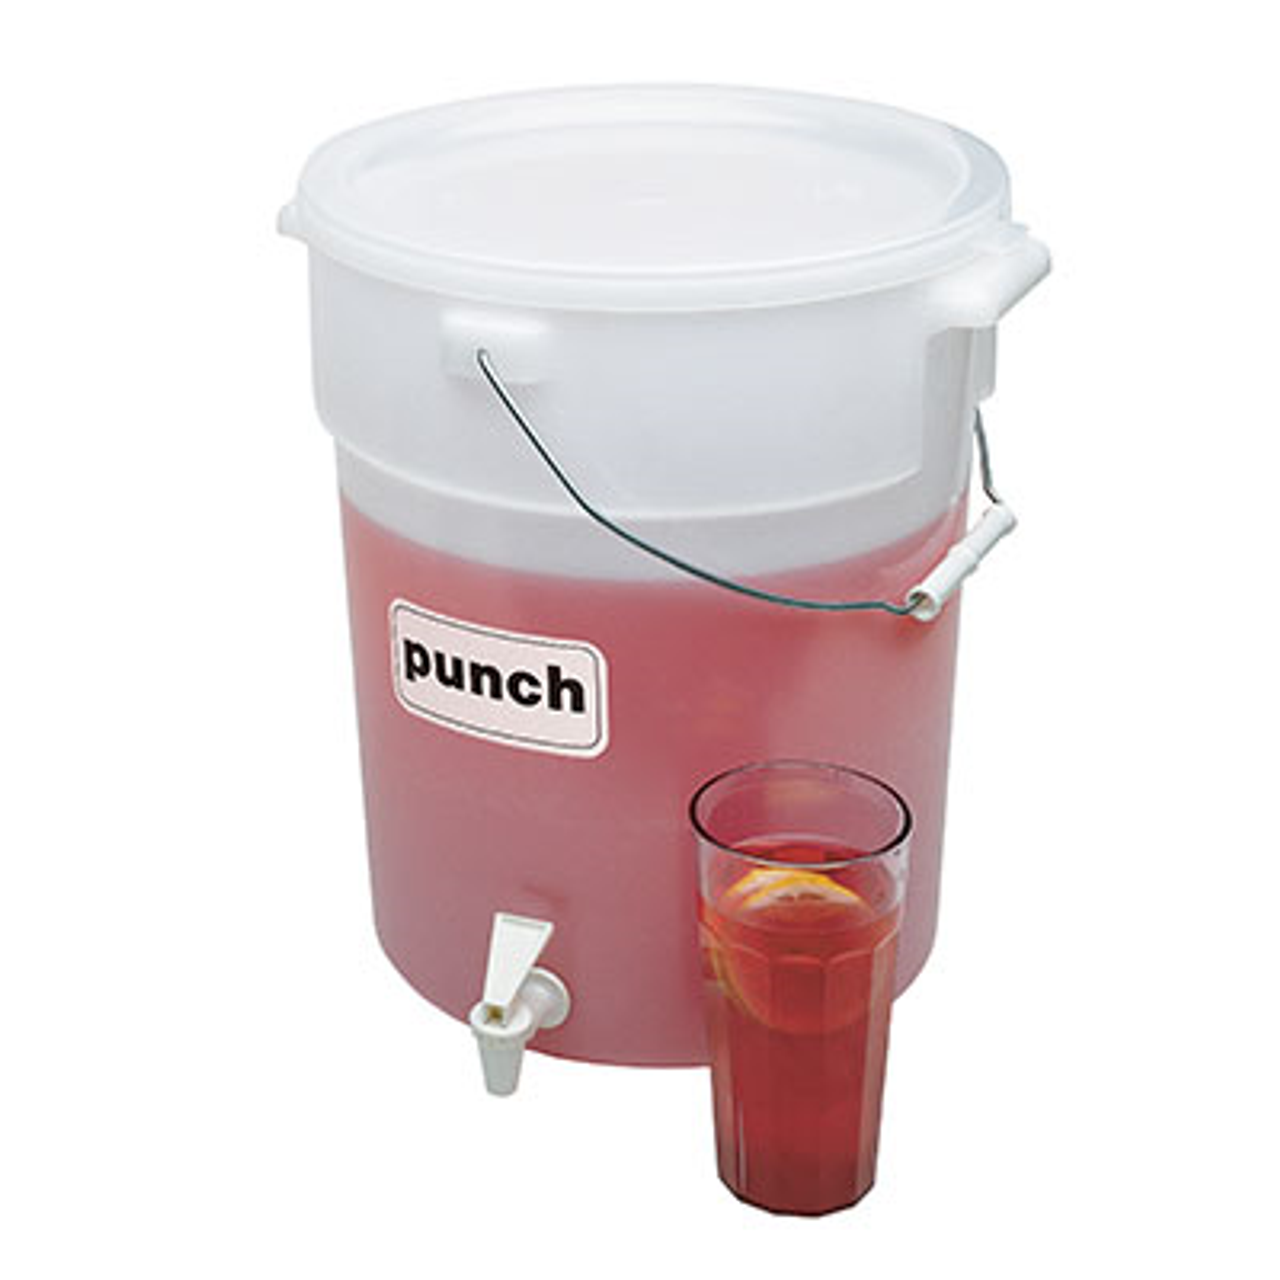 https://cdn11.bigcommerce.com/s-g3i86bef61/images/stencil/1280x1280/products/570/2990/Cambro-DSPR6148-Beverage-Dispenser__99170.1665425831.png?c=1